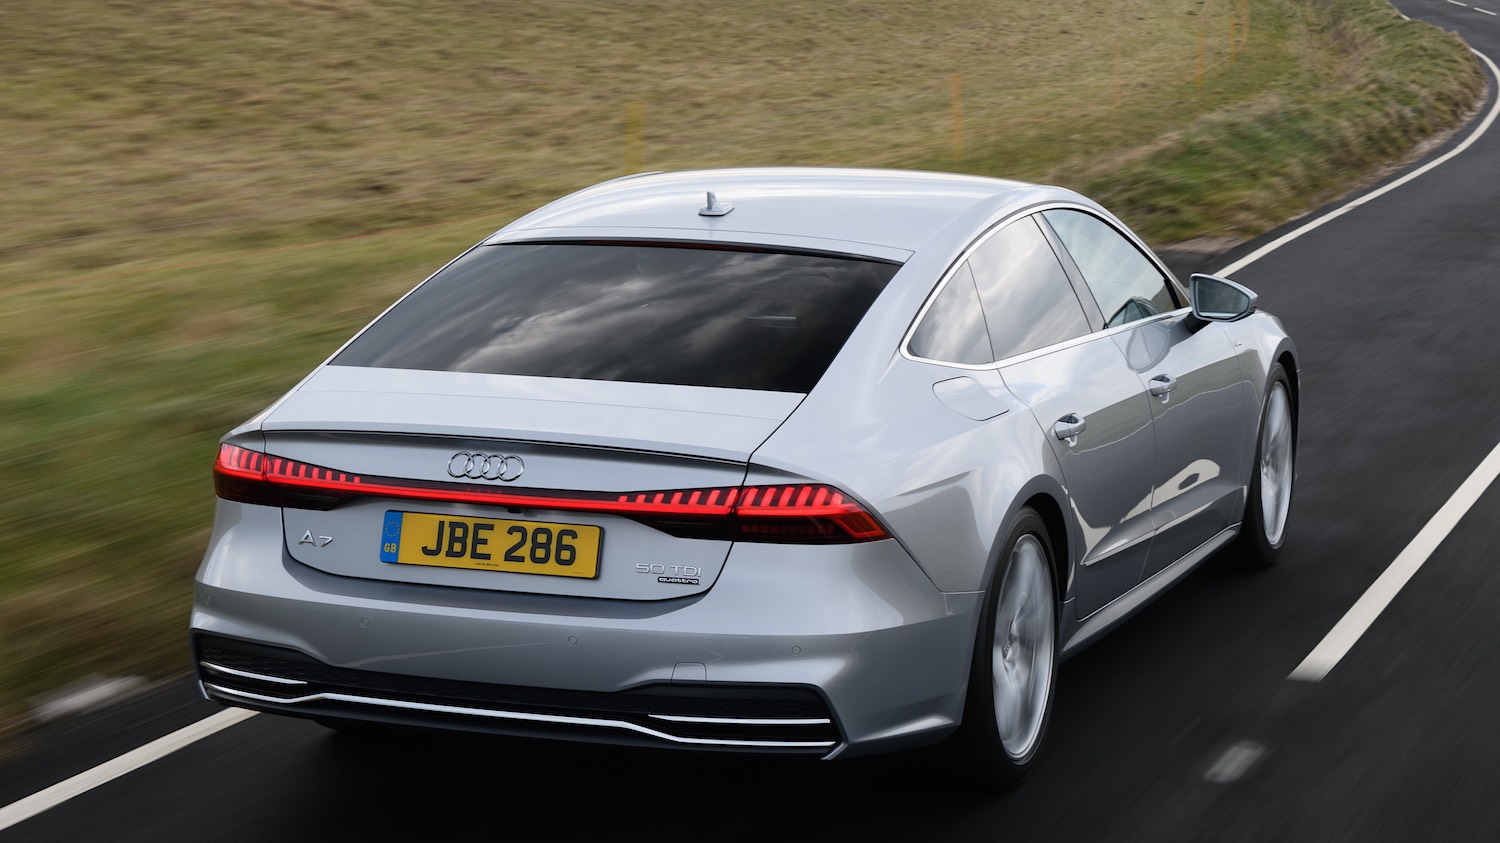 Neil Lyndon motoring correspondent reviews the latest Audi A7 for Drive 17